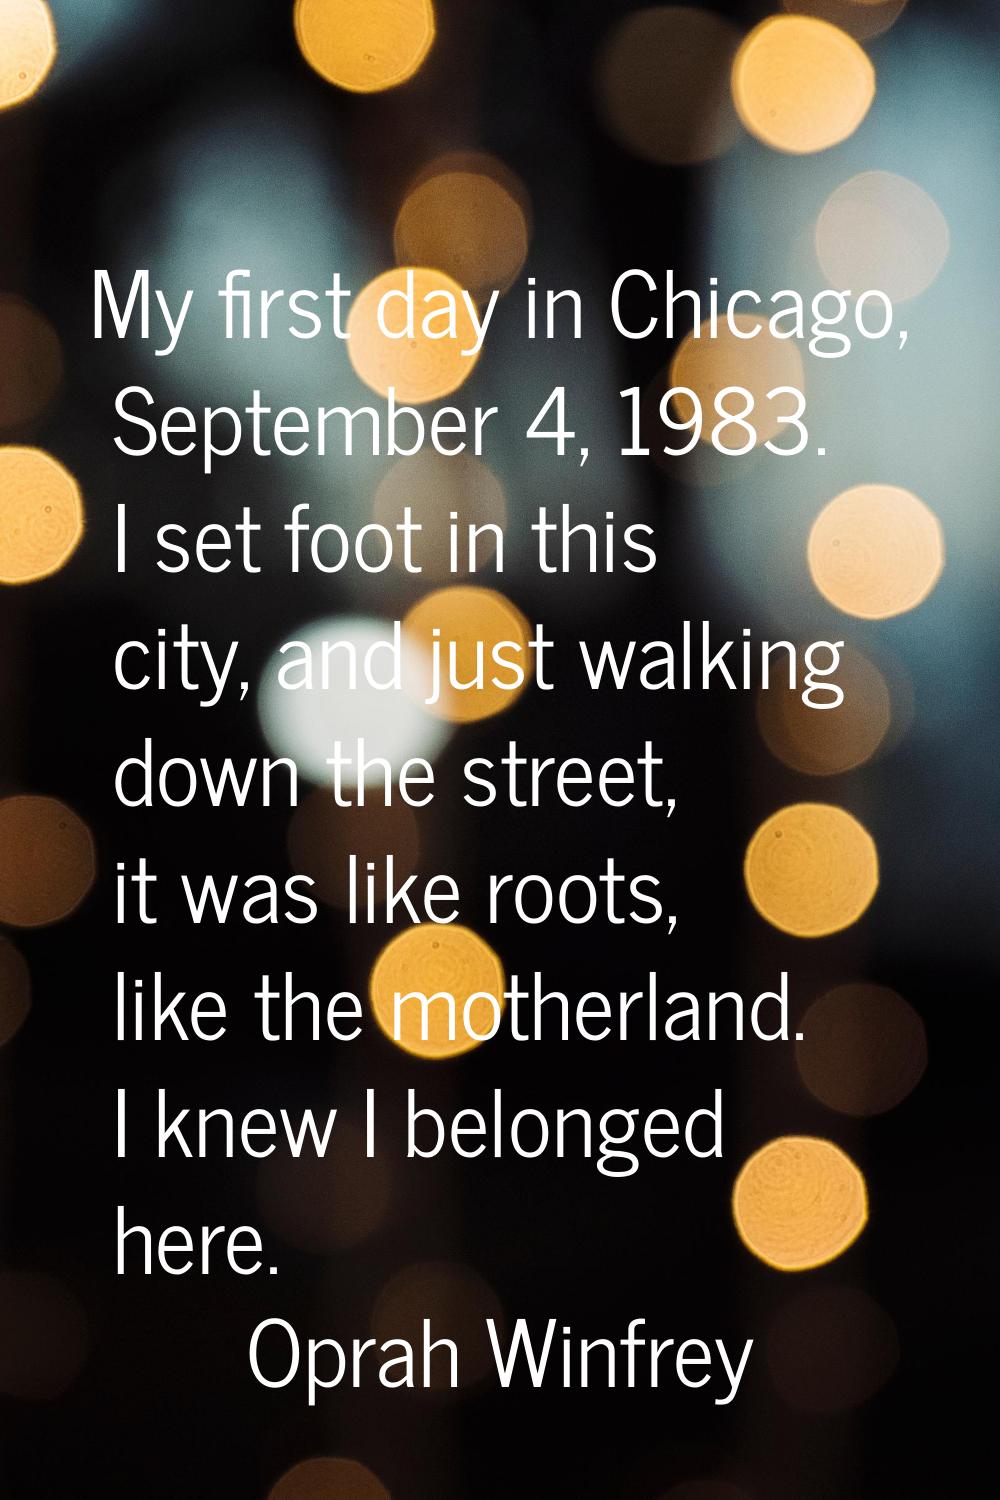 My first day in Chicago, September 4, 1983. I set foot in this city, and just walking down the stre